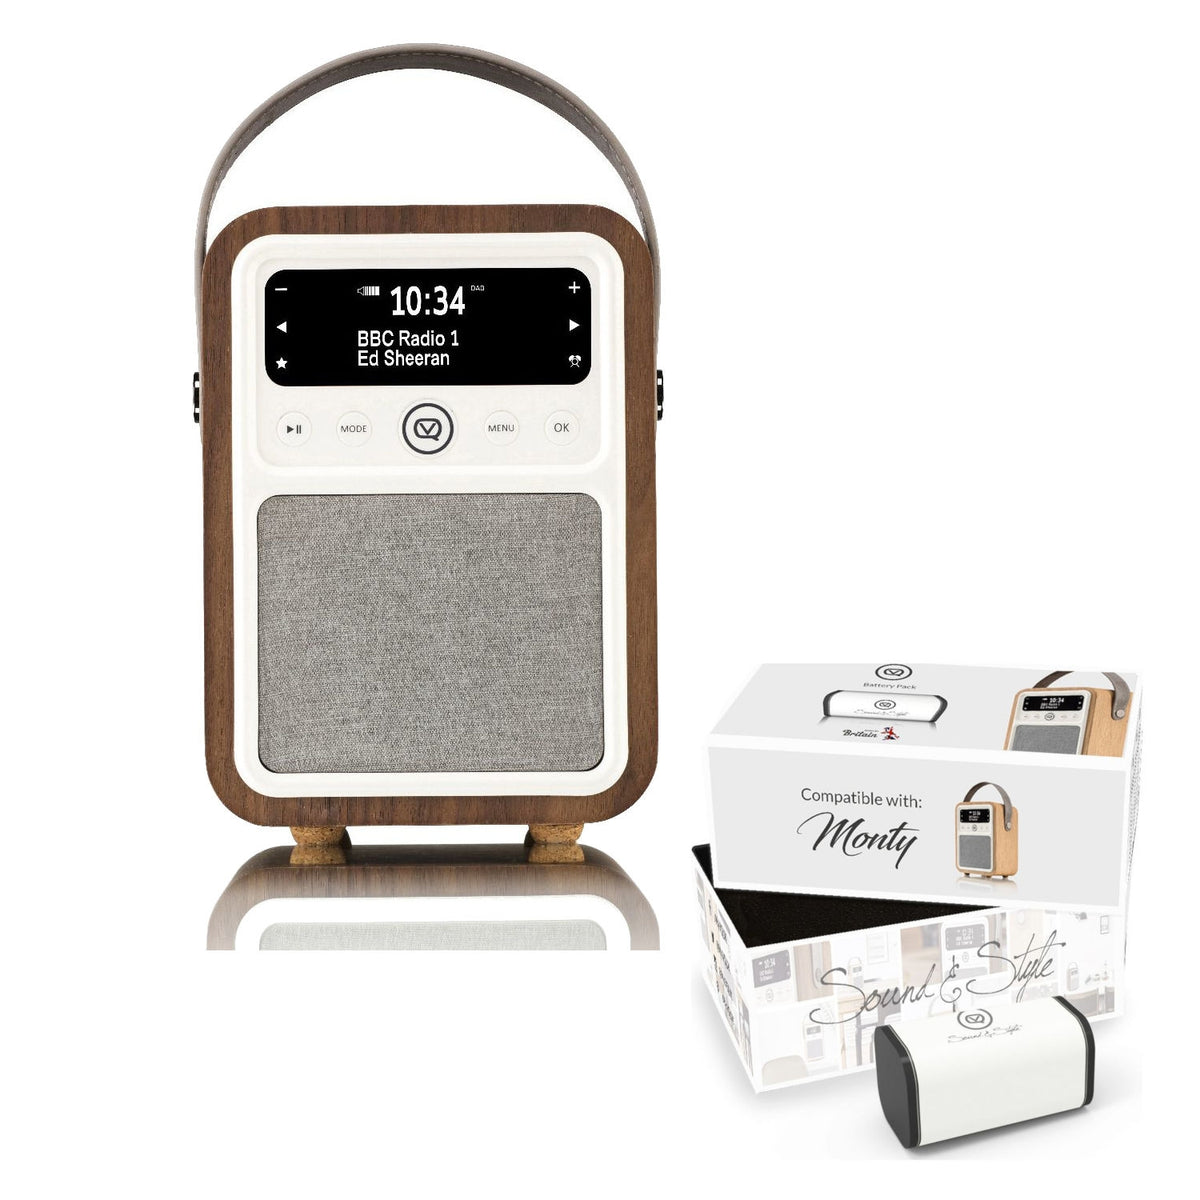 VQ Monty Portable DAB/FM Radio & Bluetooth Speaker with Rechargeable Battery Pack in Walnut - 1